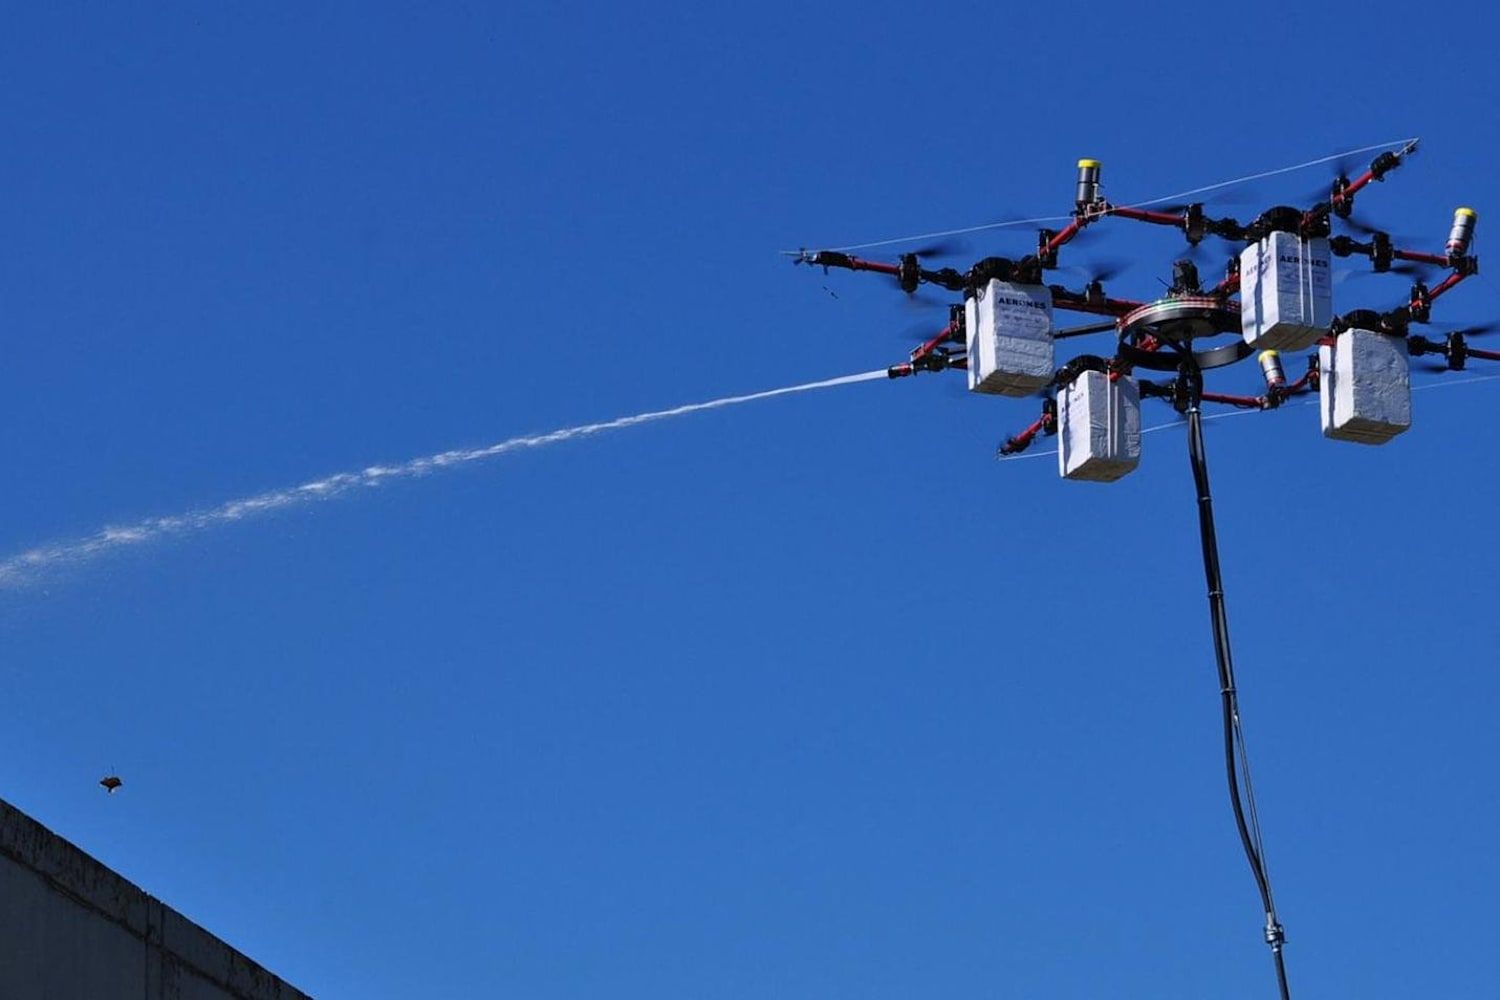 🔥 A drone that can fight fires where firefighters can't reach